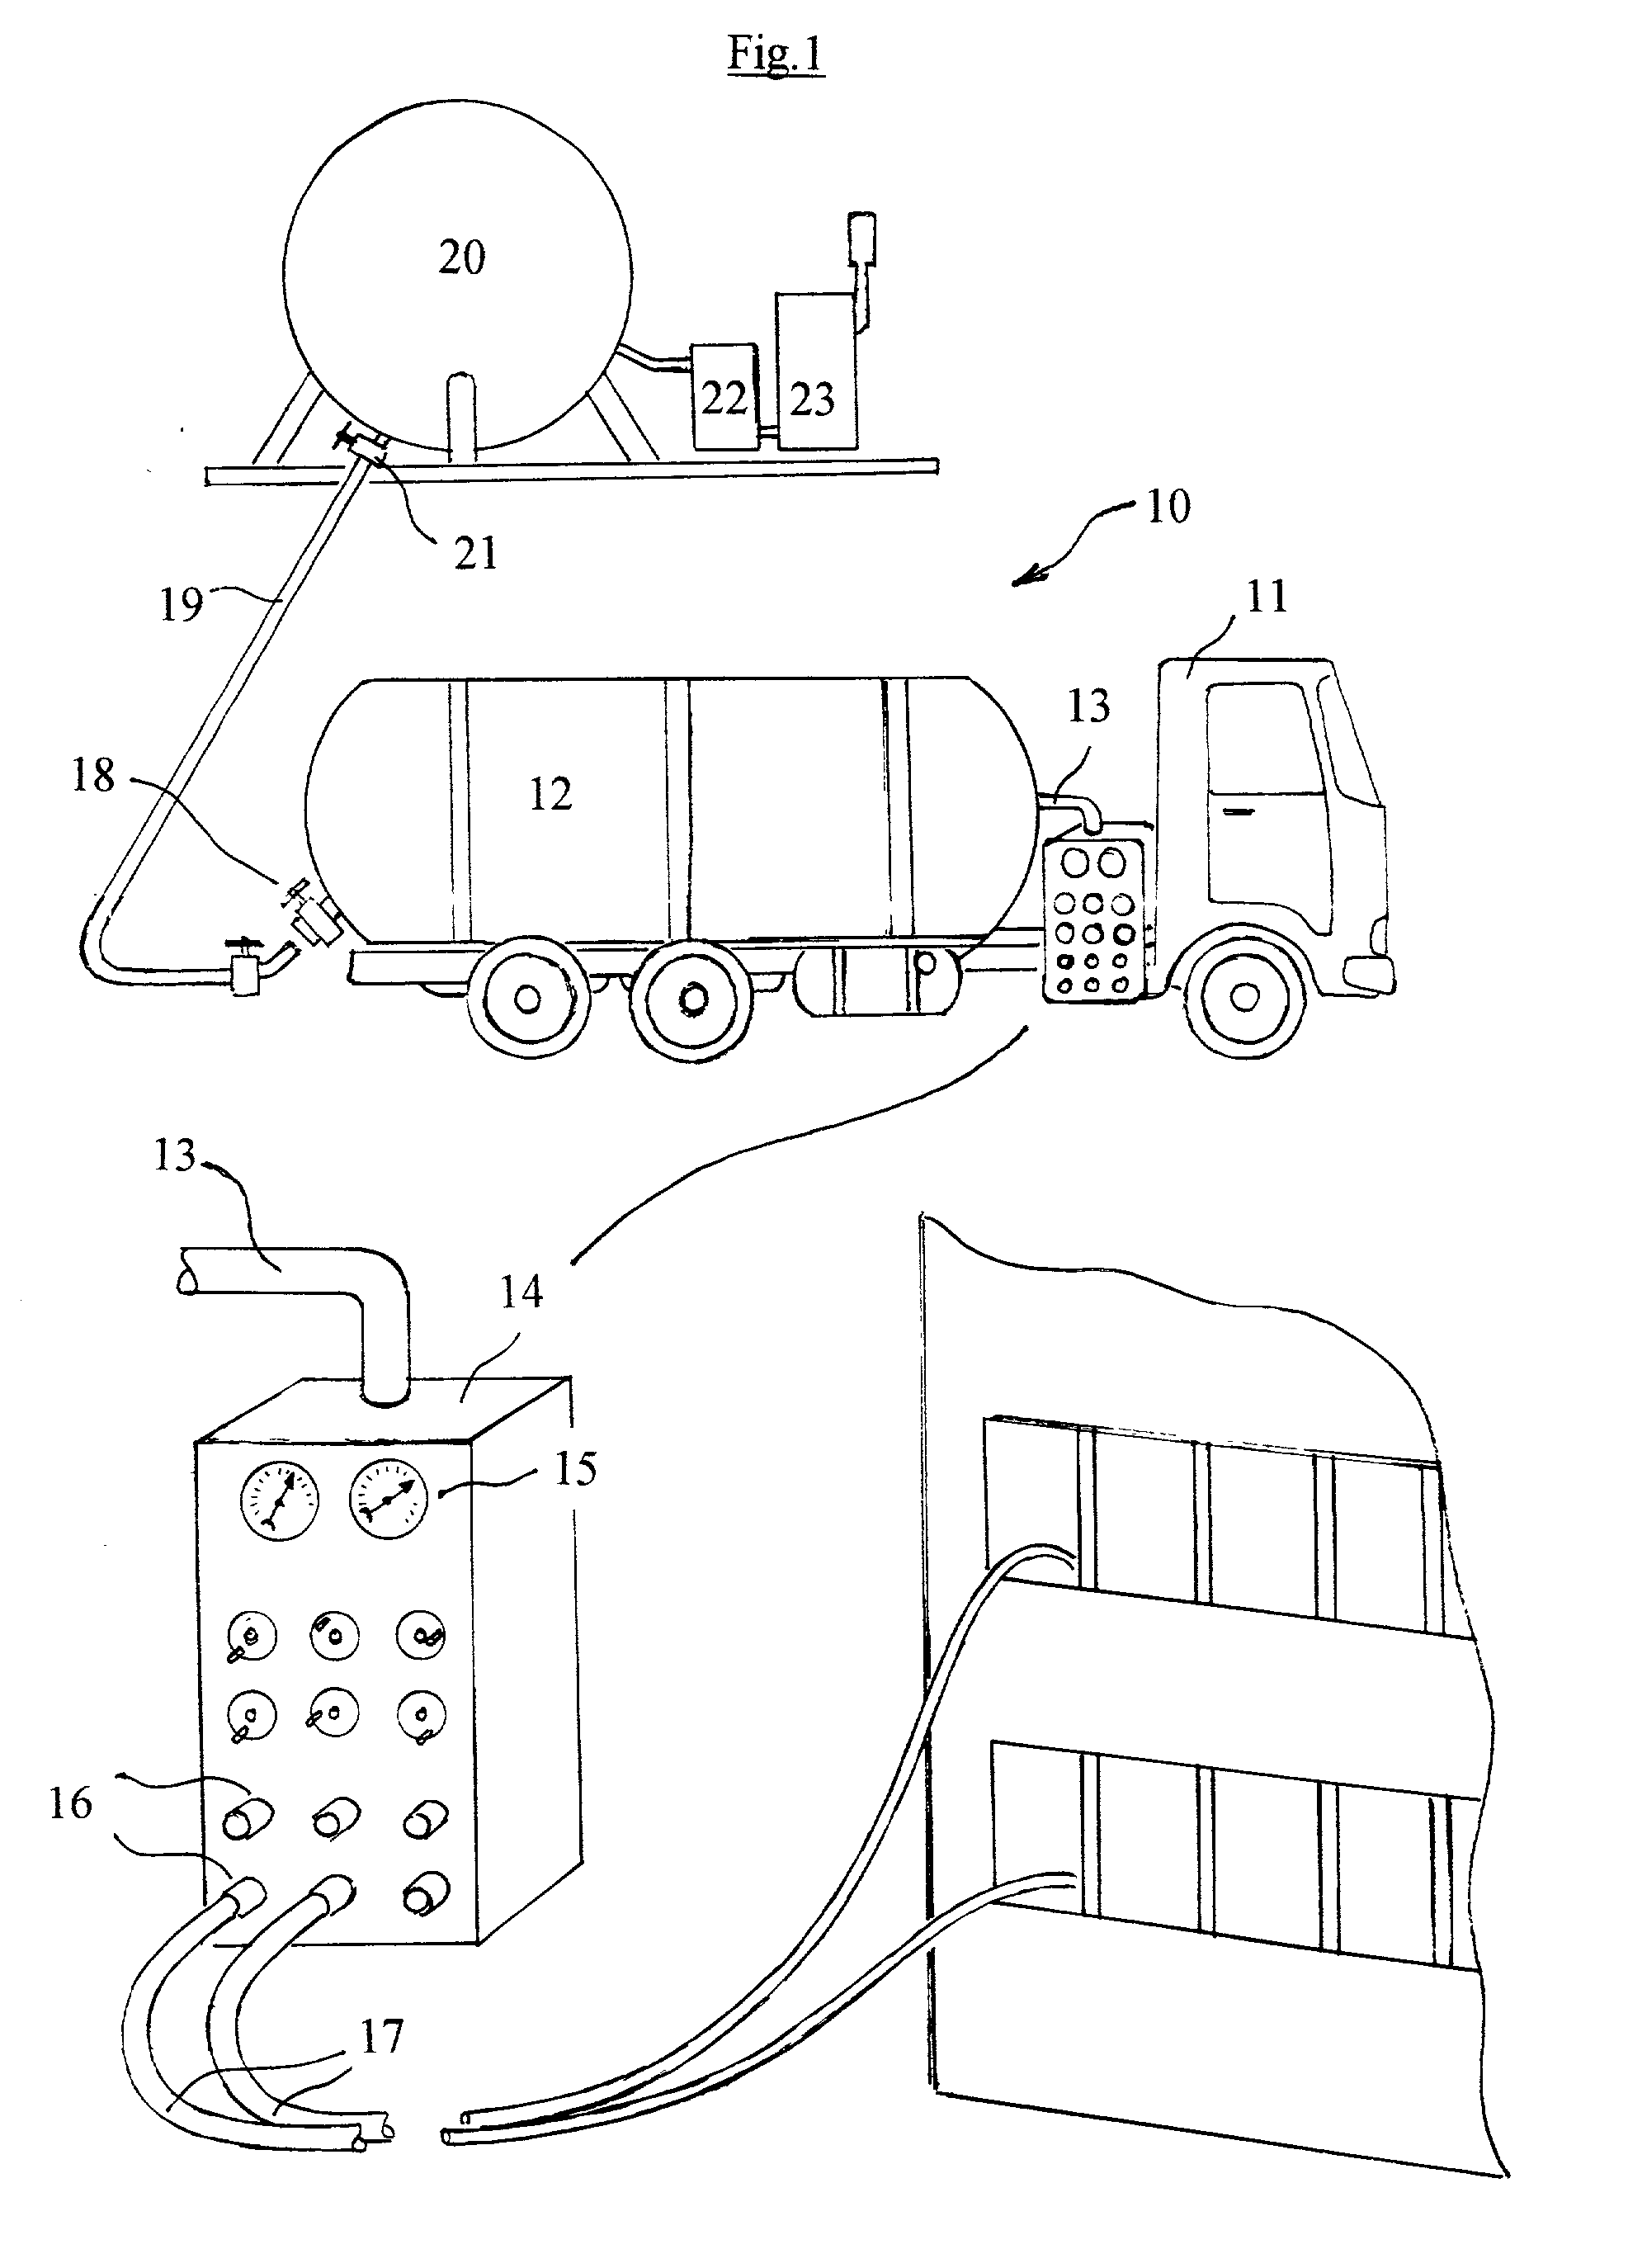 Mobile firefighting systems with breathable hypoxic fire extinguishing compositions for human occupied environments